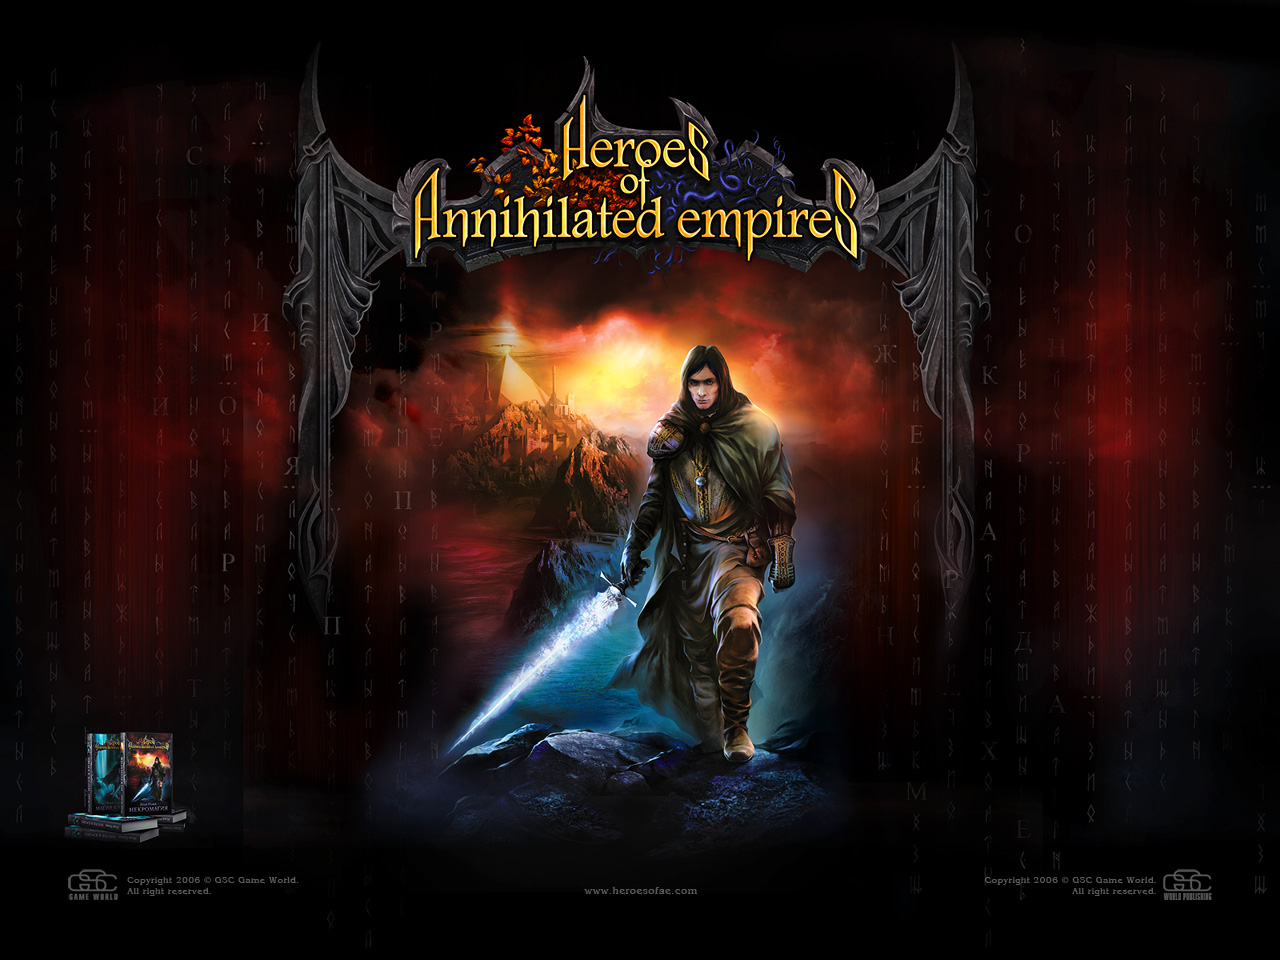 Heroes_of_annihilated_empires_02_1280x960.jpg